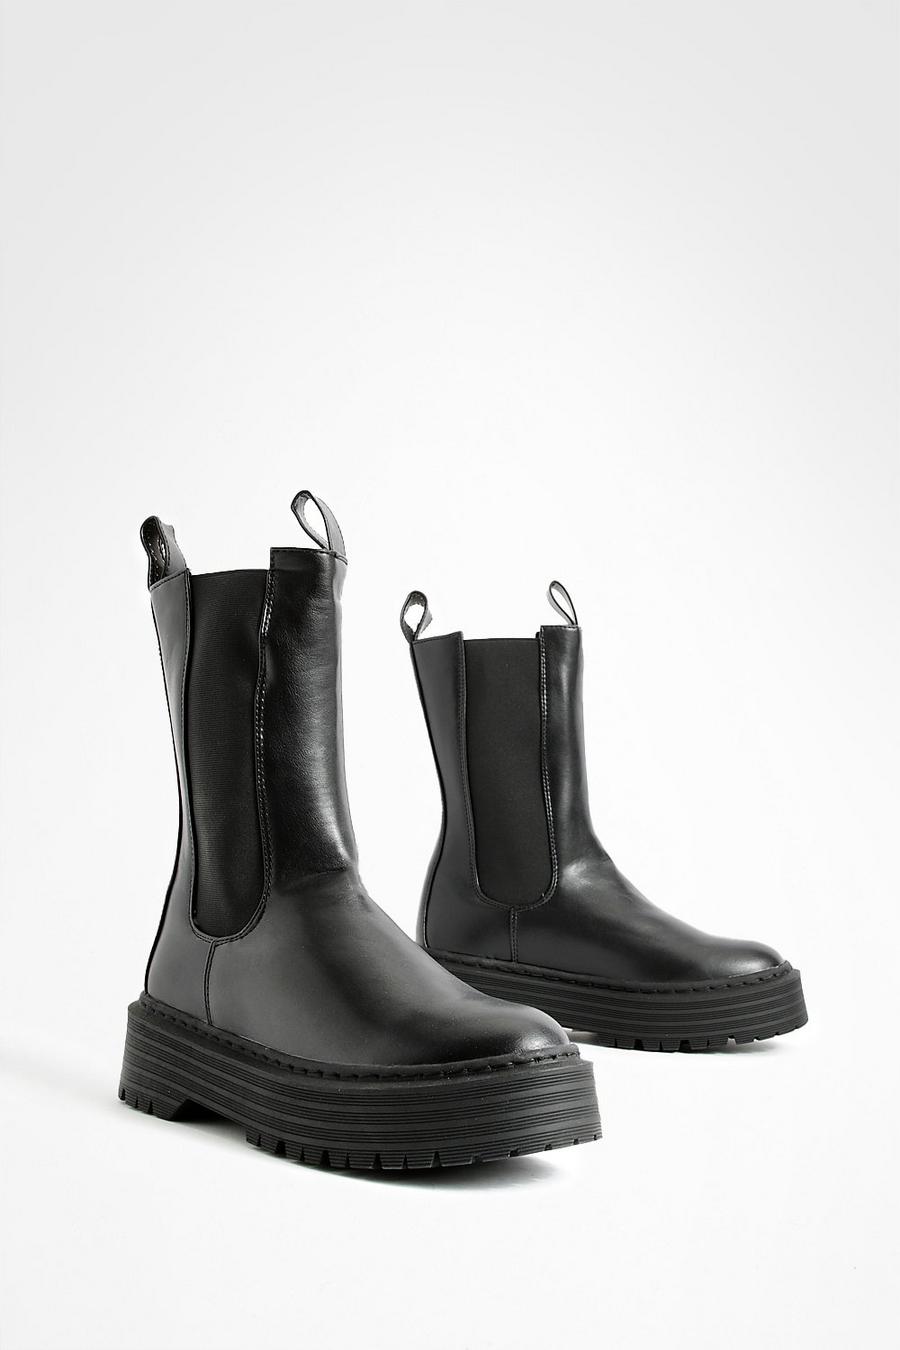 Black Calf Height Chunky Chelsea Boots